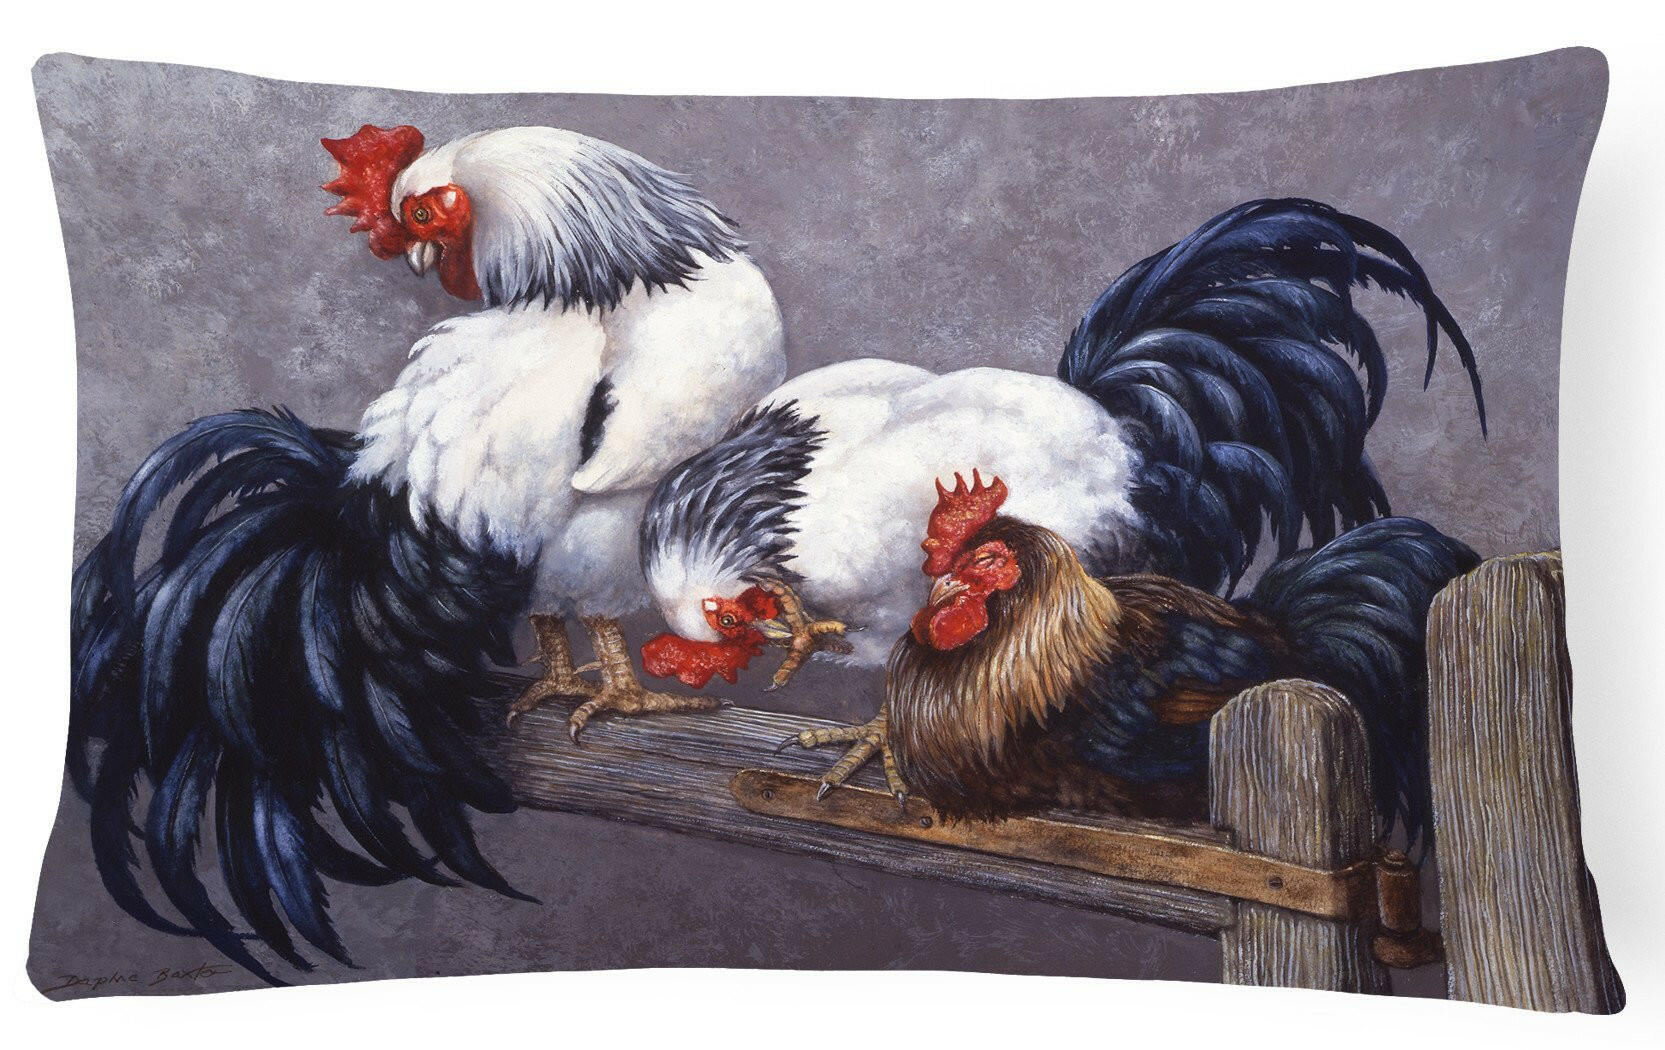 Roosters Roosting Fabric Decorative Pillow BDBA0208PW1216 by Caroline's Treasures